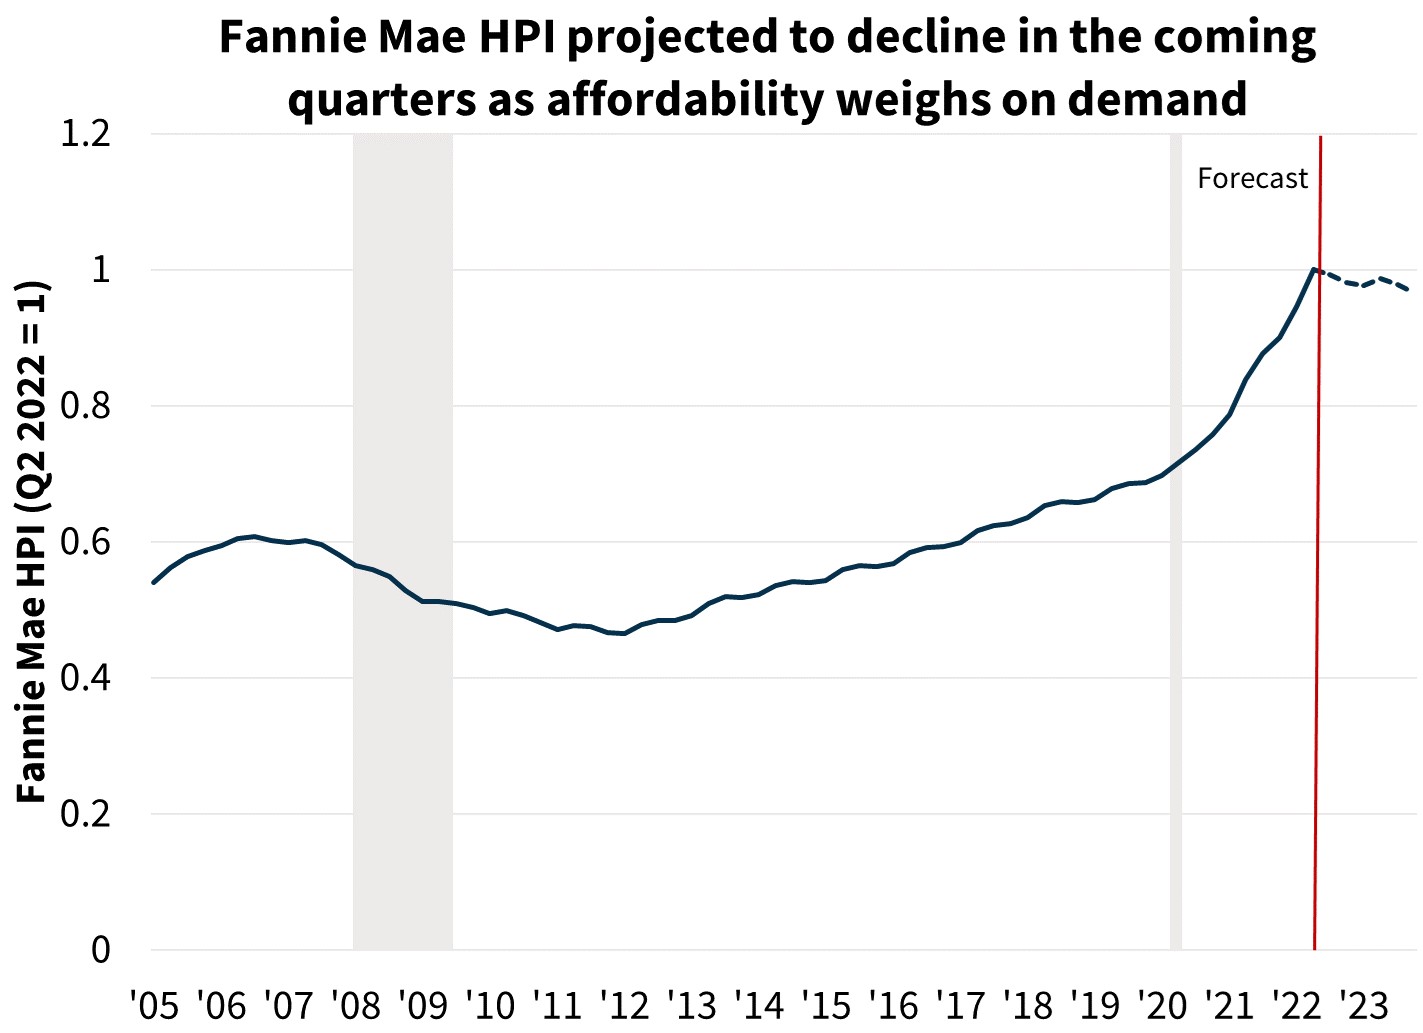  Fannie Mae HPI projected to decline in the coming quarters as affordability weighs on demand 